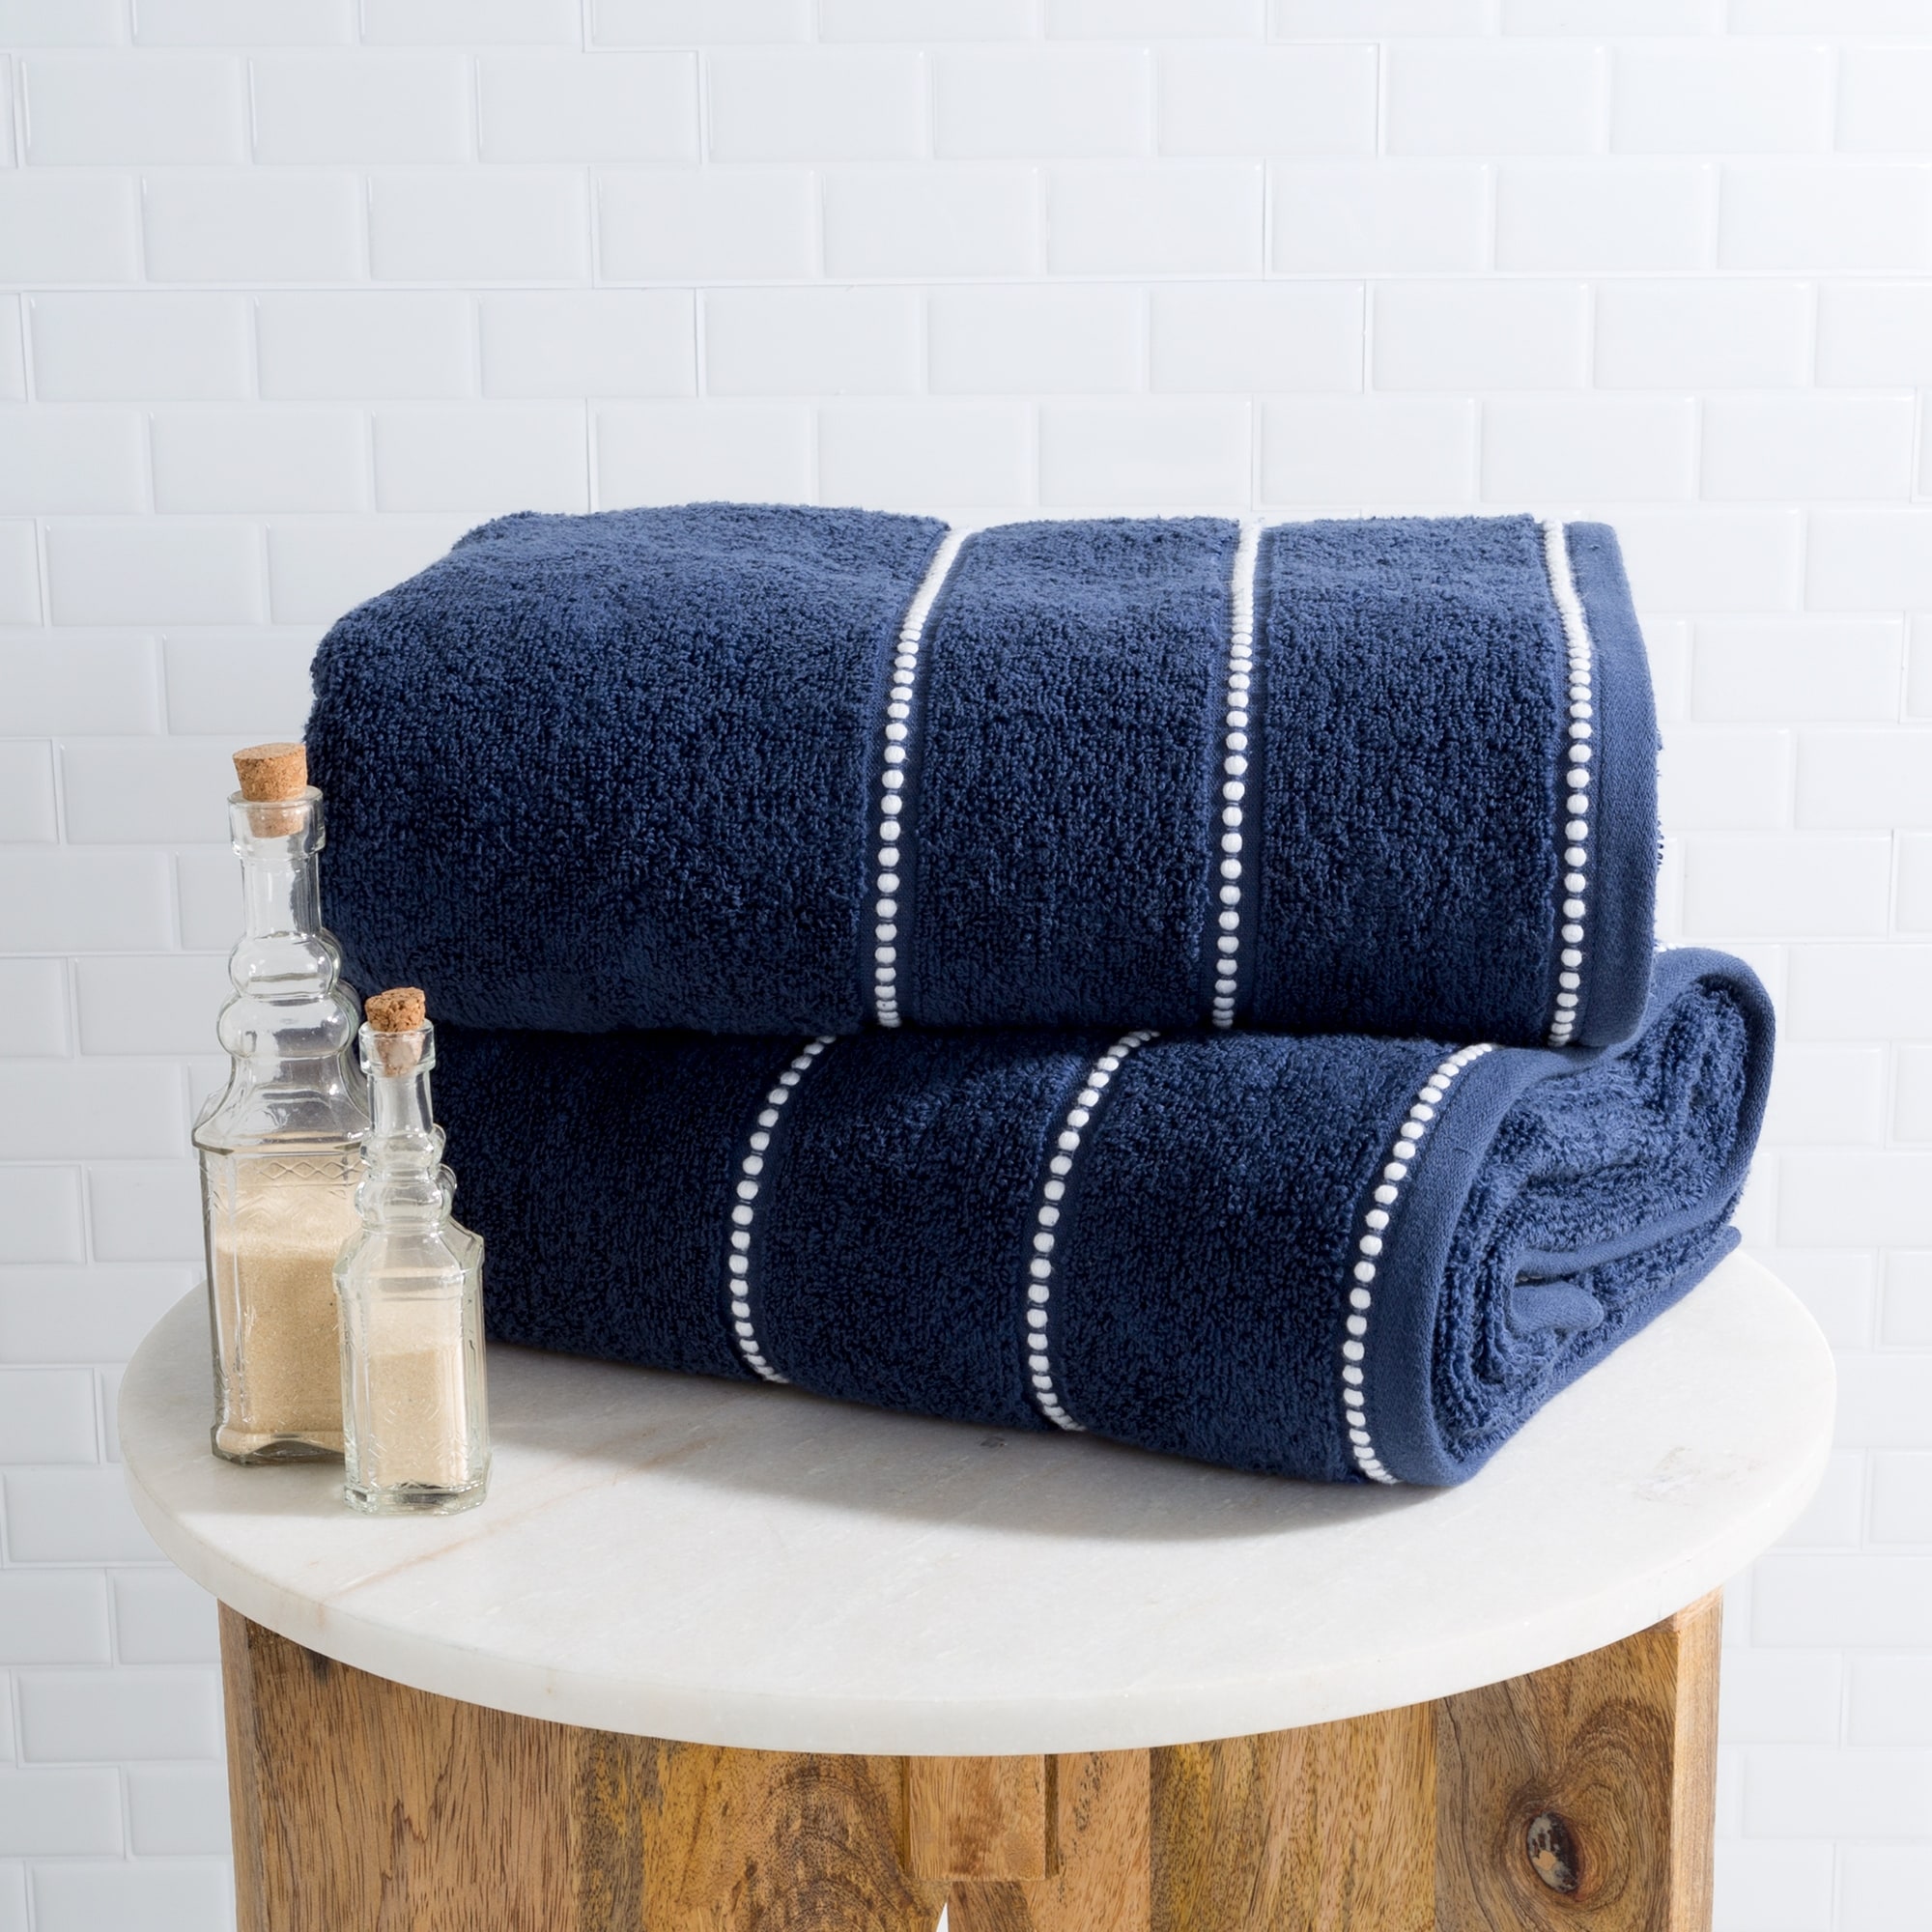 https://ak1.ostkcdn.com/images/products/is/images/direct/0b606f62f3bfbad293065583a88d19ebc7514cca/Luxury-Cotton-Towel-Set--Washable-2-Piece-Bath-Sheet-Set-Made-From-100%25-Zero-Twist-Cotton-By-Lavish-Home-%28Navy---White%29.jpg